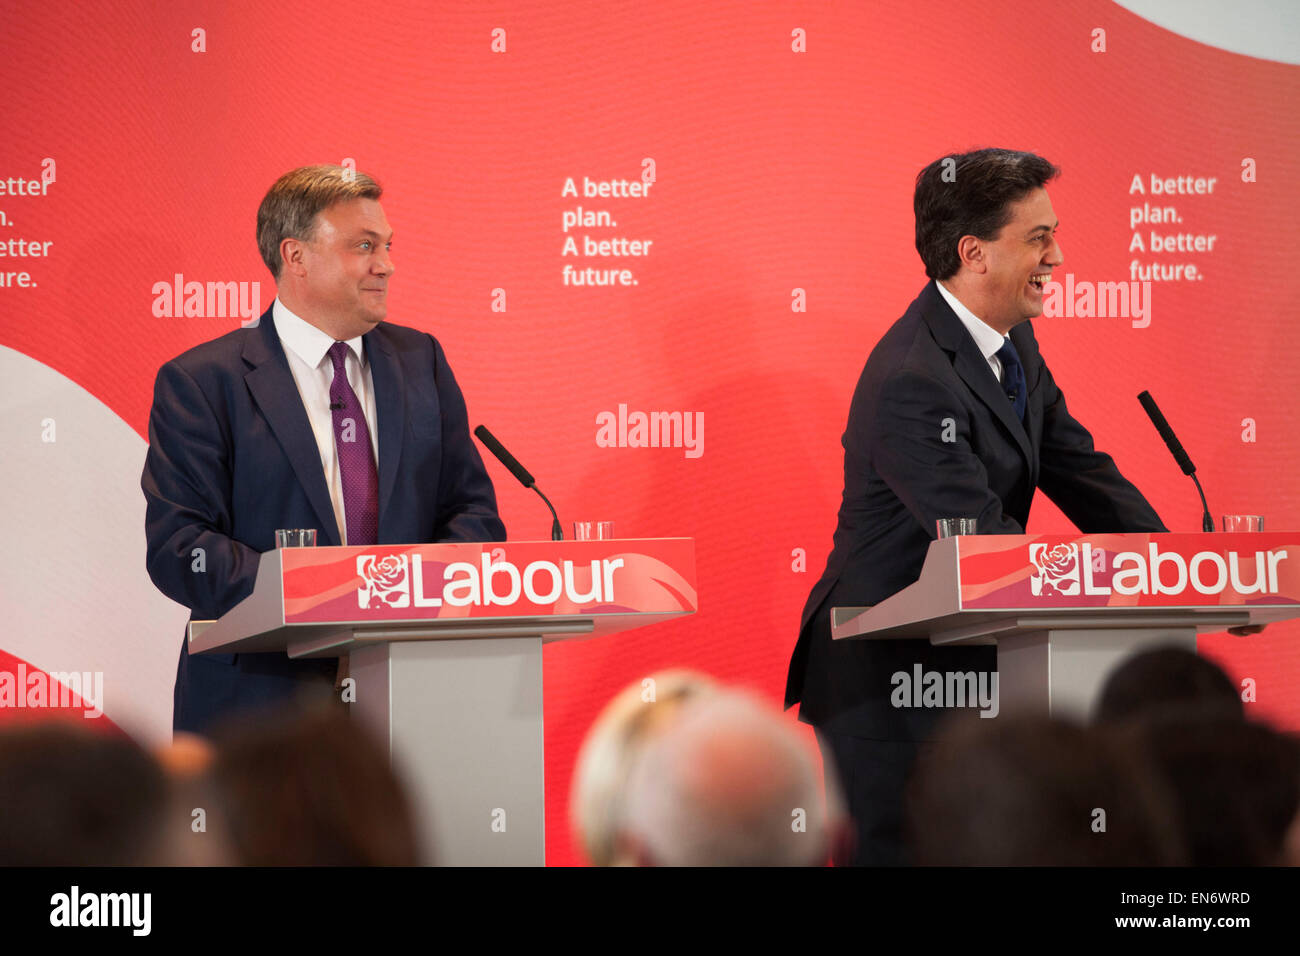 London, UK. Wednesday 29th April 2015. Labour Party Leader Ed Miliband, Shadow Chancellor Ed Balls at a General Election 2015 campaign event on the Tory threat to family finances, entitled: The Tories’ Secret Plan. Held at the Royal Institute of British Architects. Credit:  Michael Kemp/Alamy Live News Stock Photo